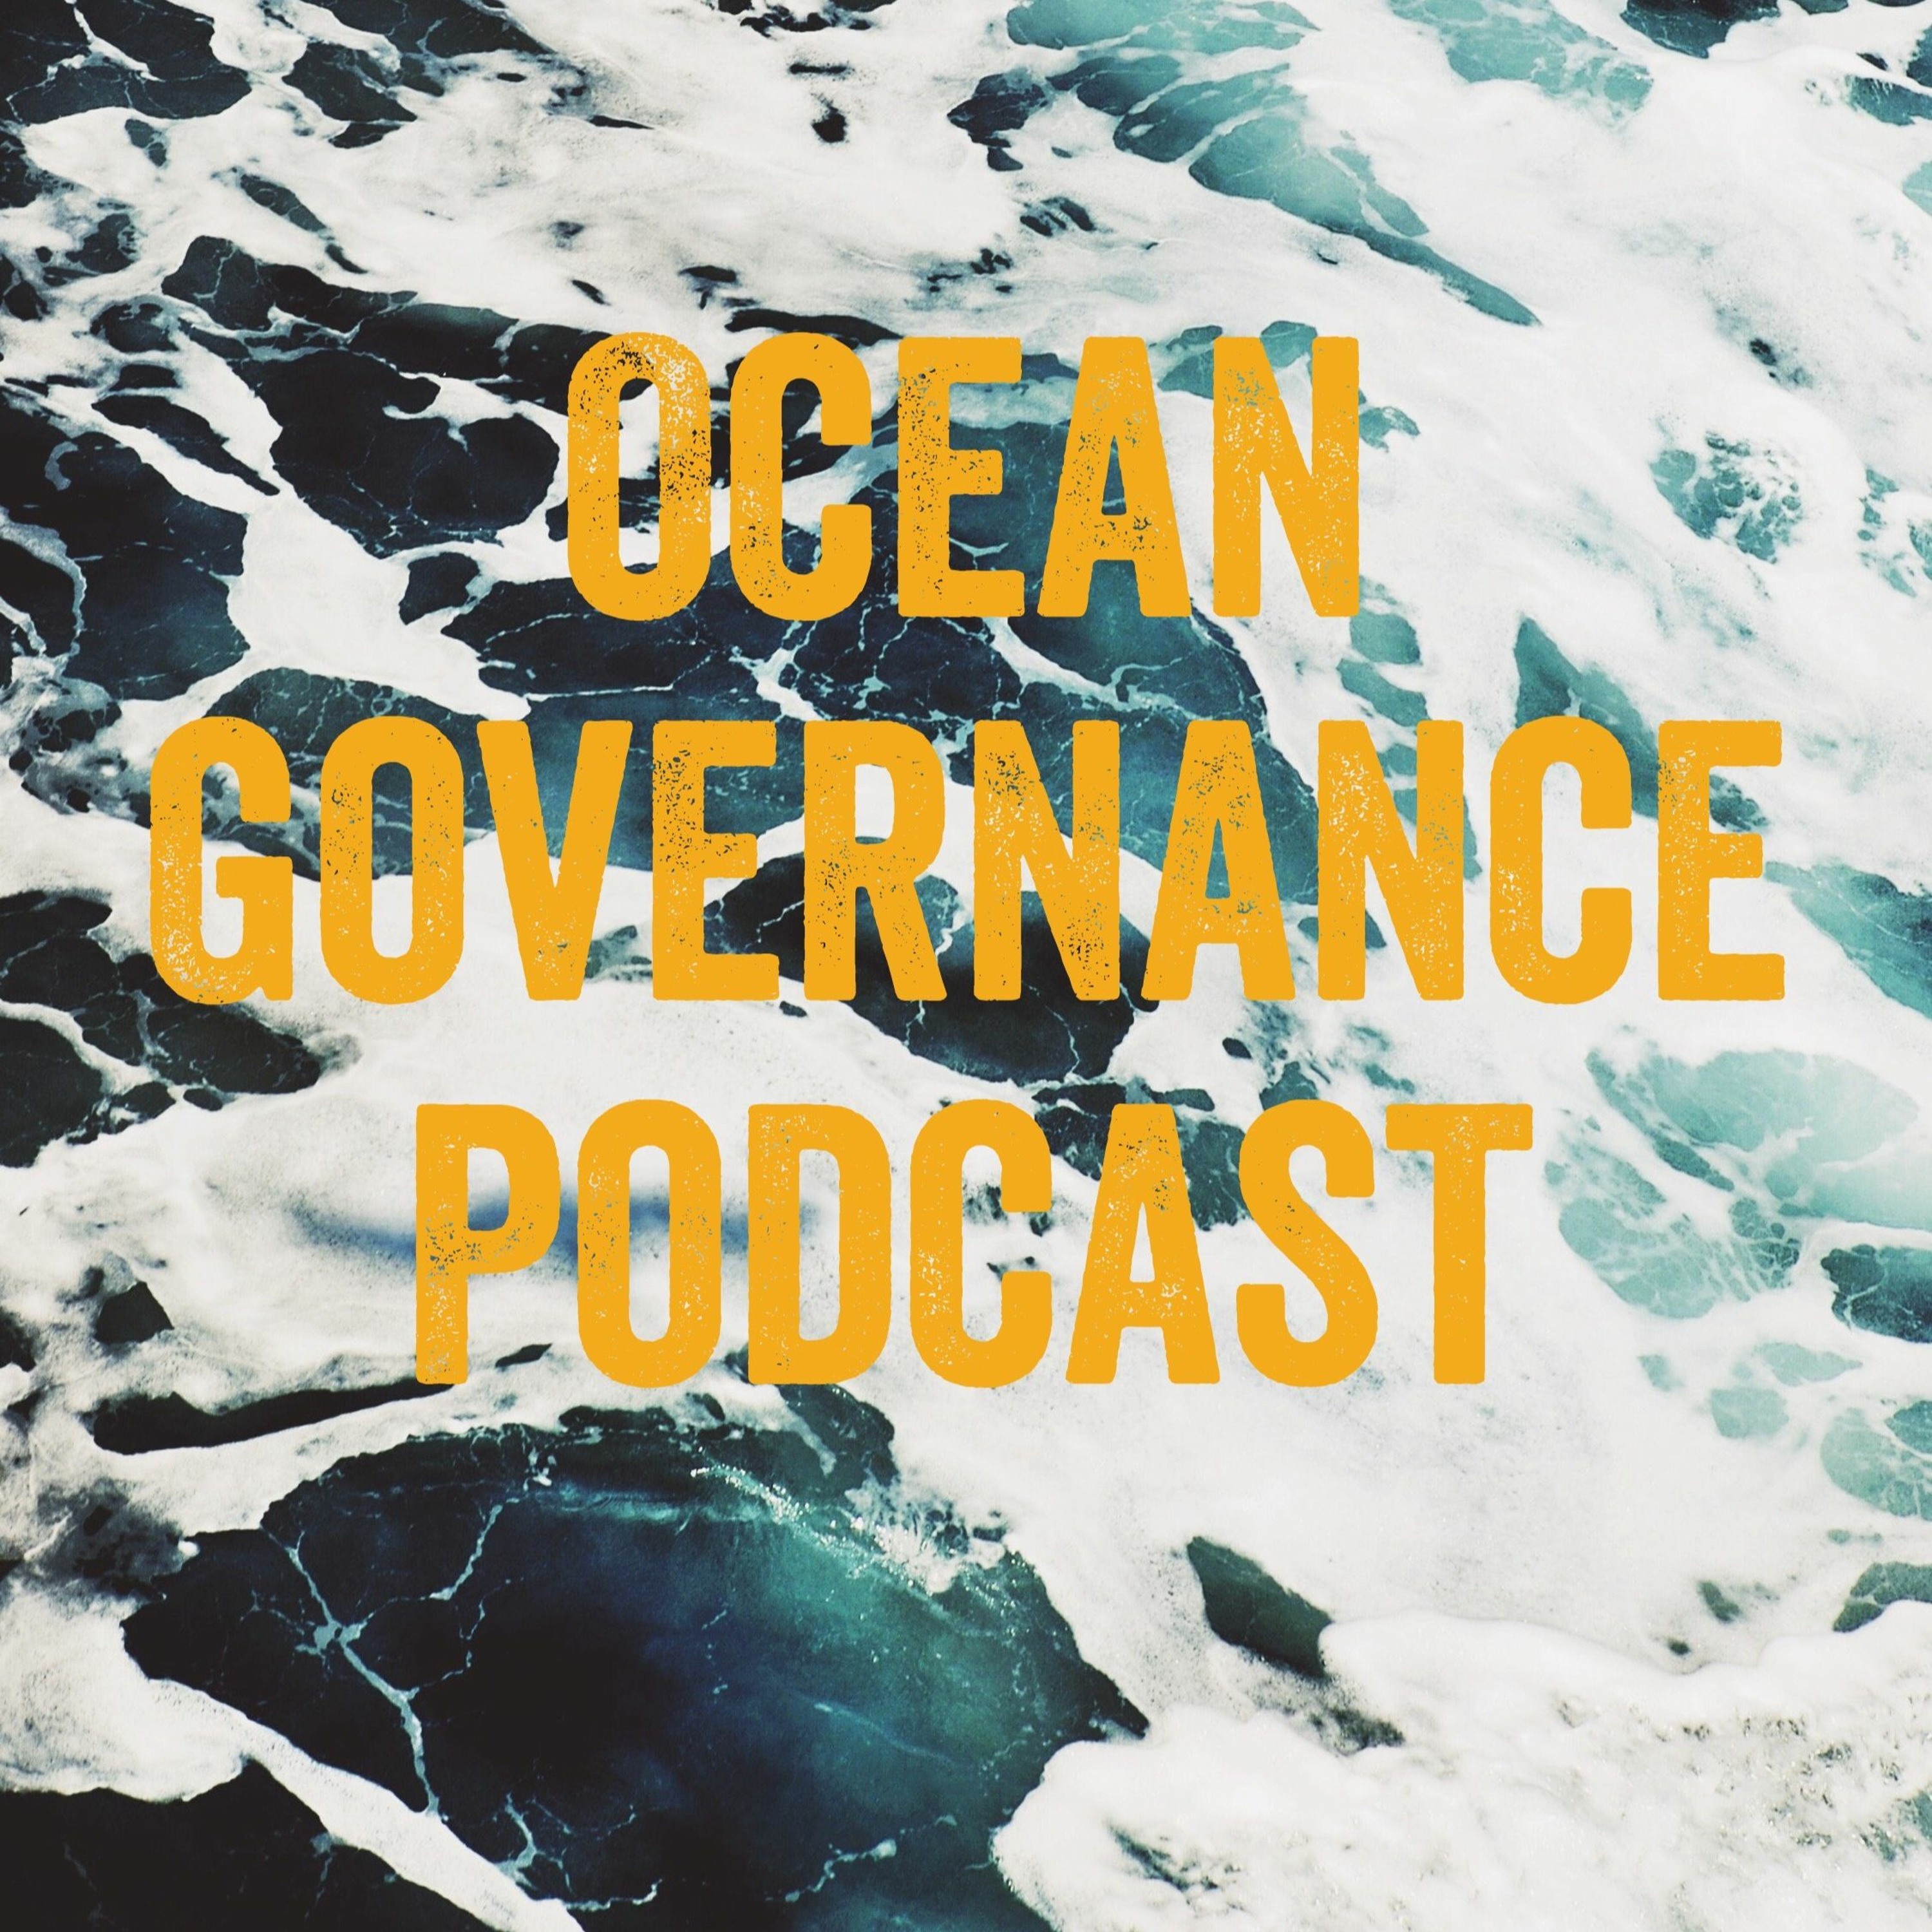 Episode 14 - The Marine Arctic: What Role For Law When The Ice Recedes?